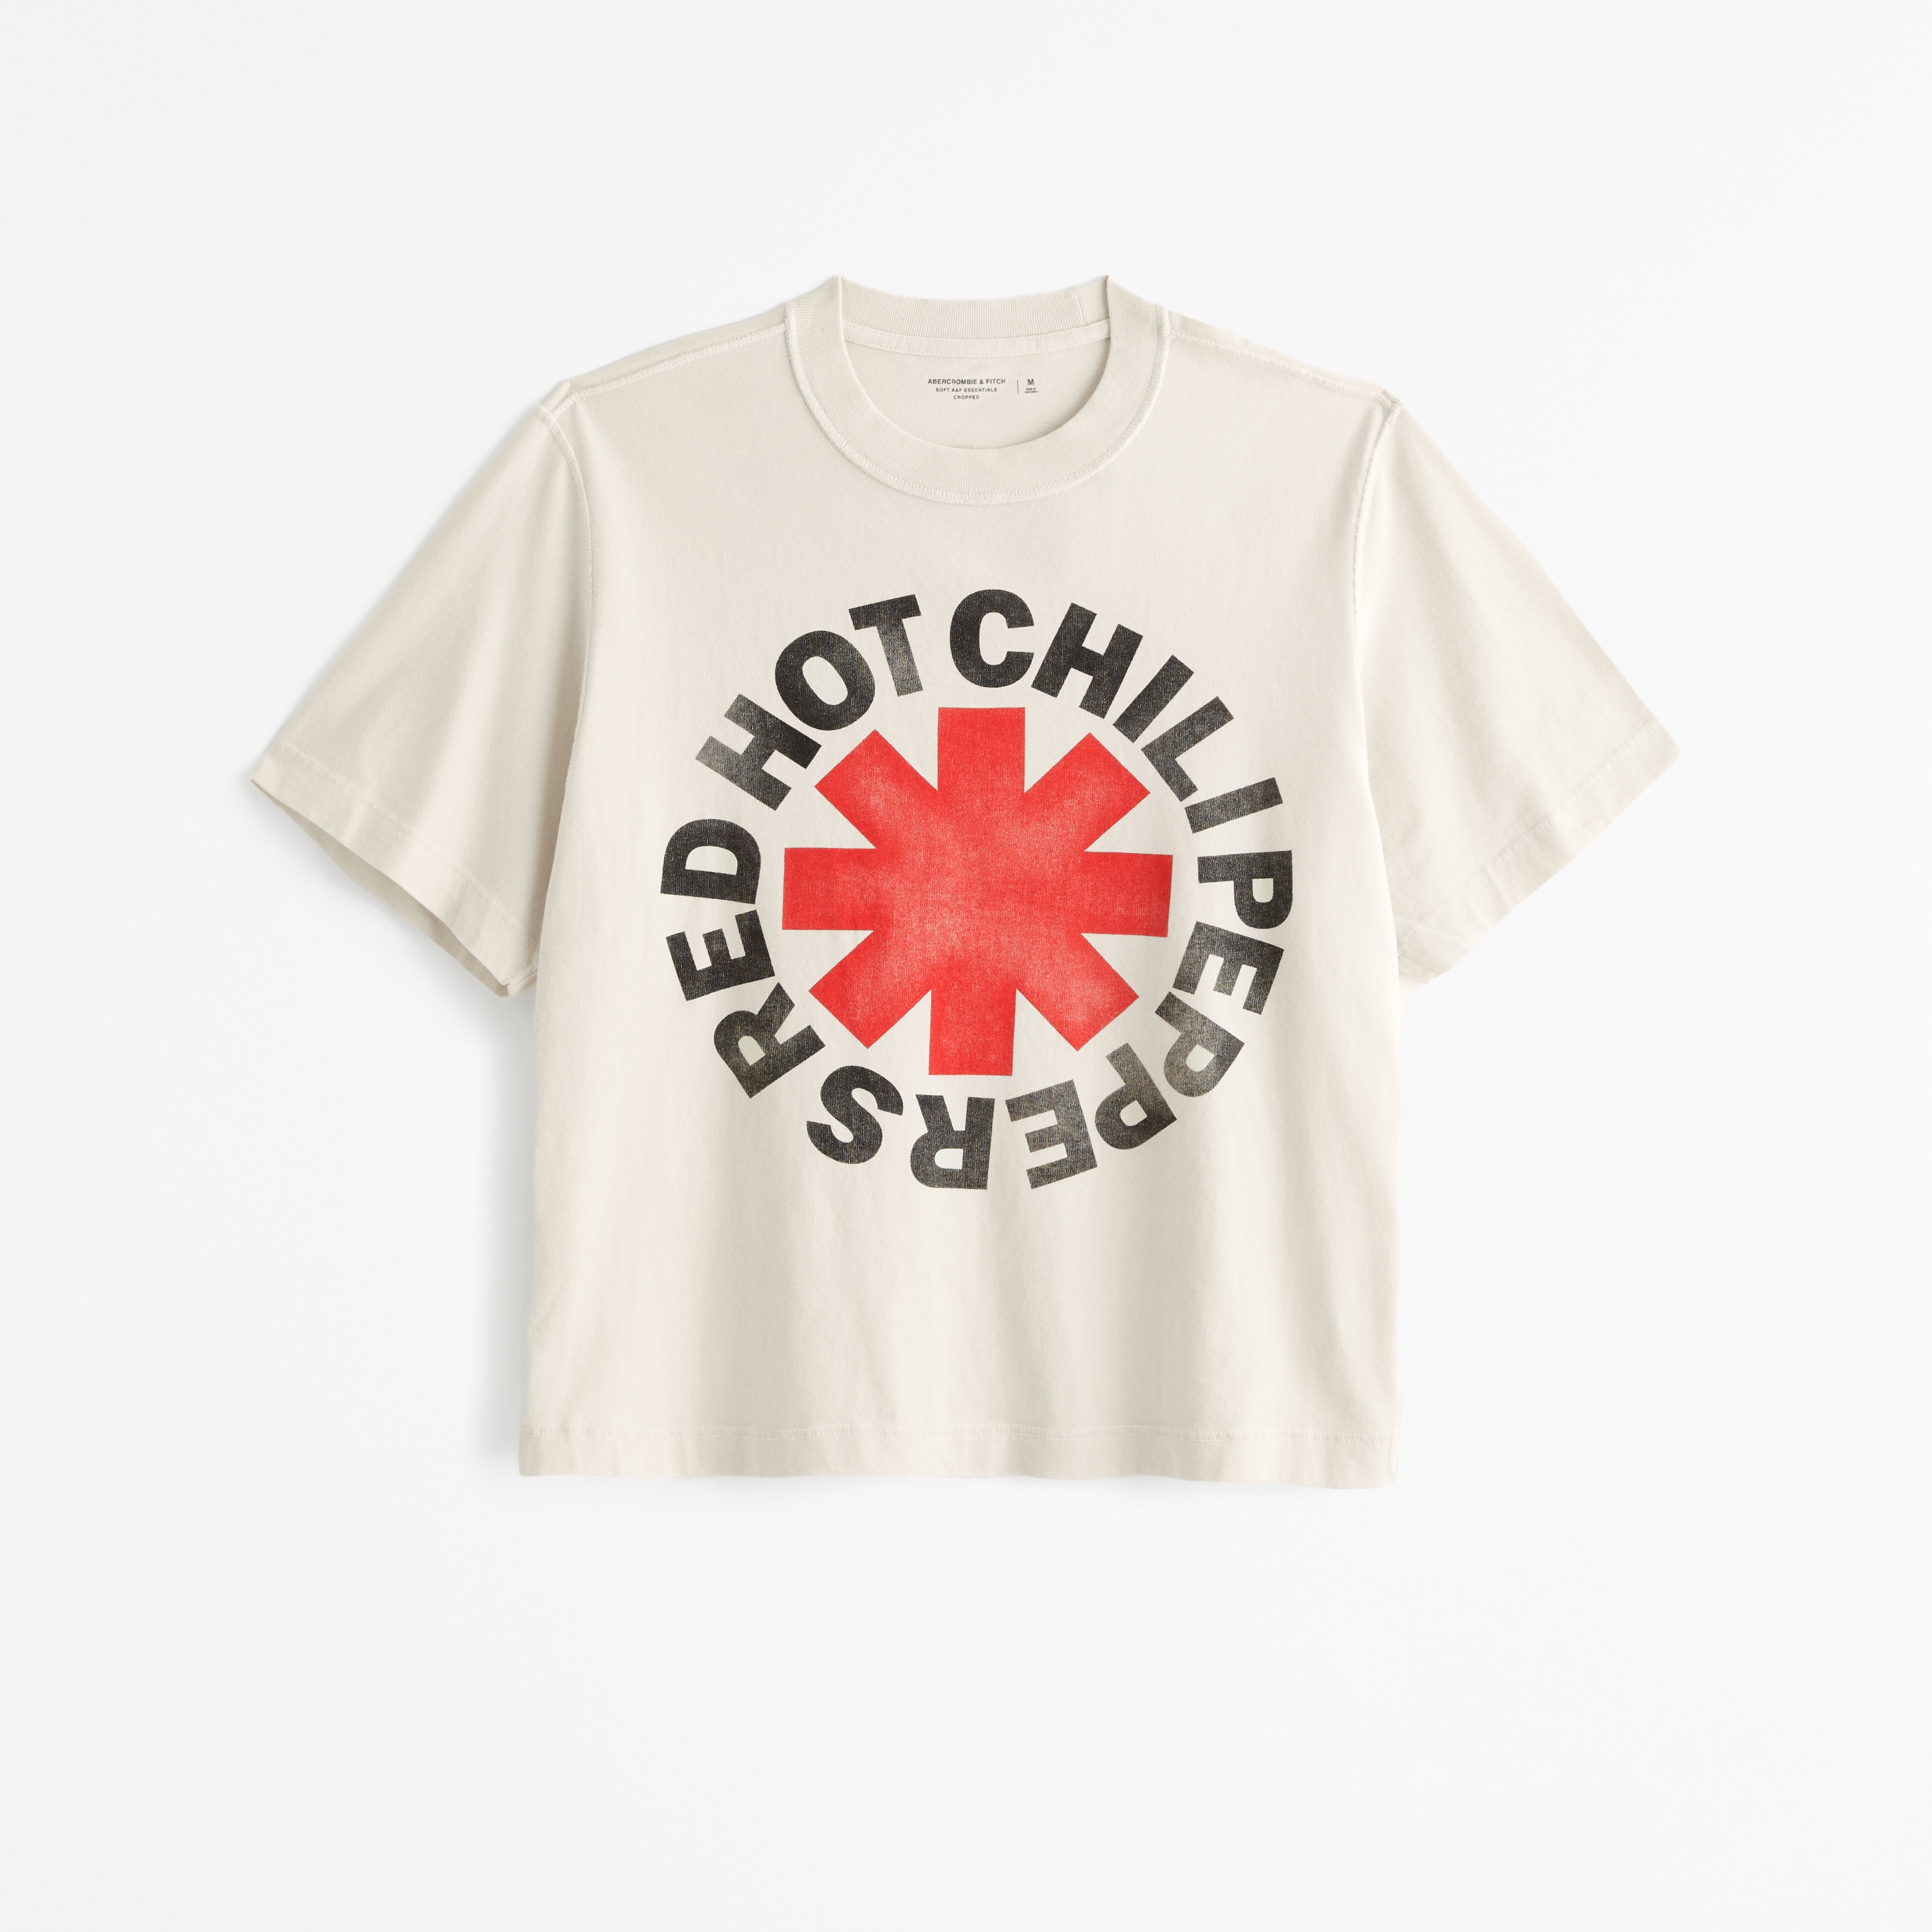 Men's Cropped Red Hot Chili Peppers Graphic Tee | Men's Tops |  Abercrombie.com